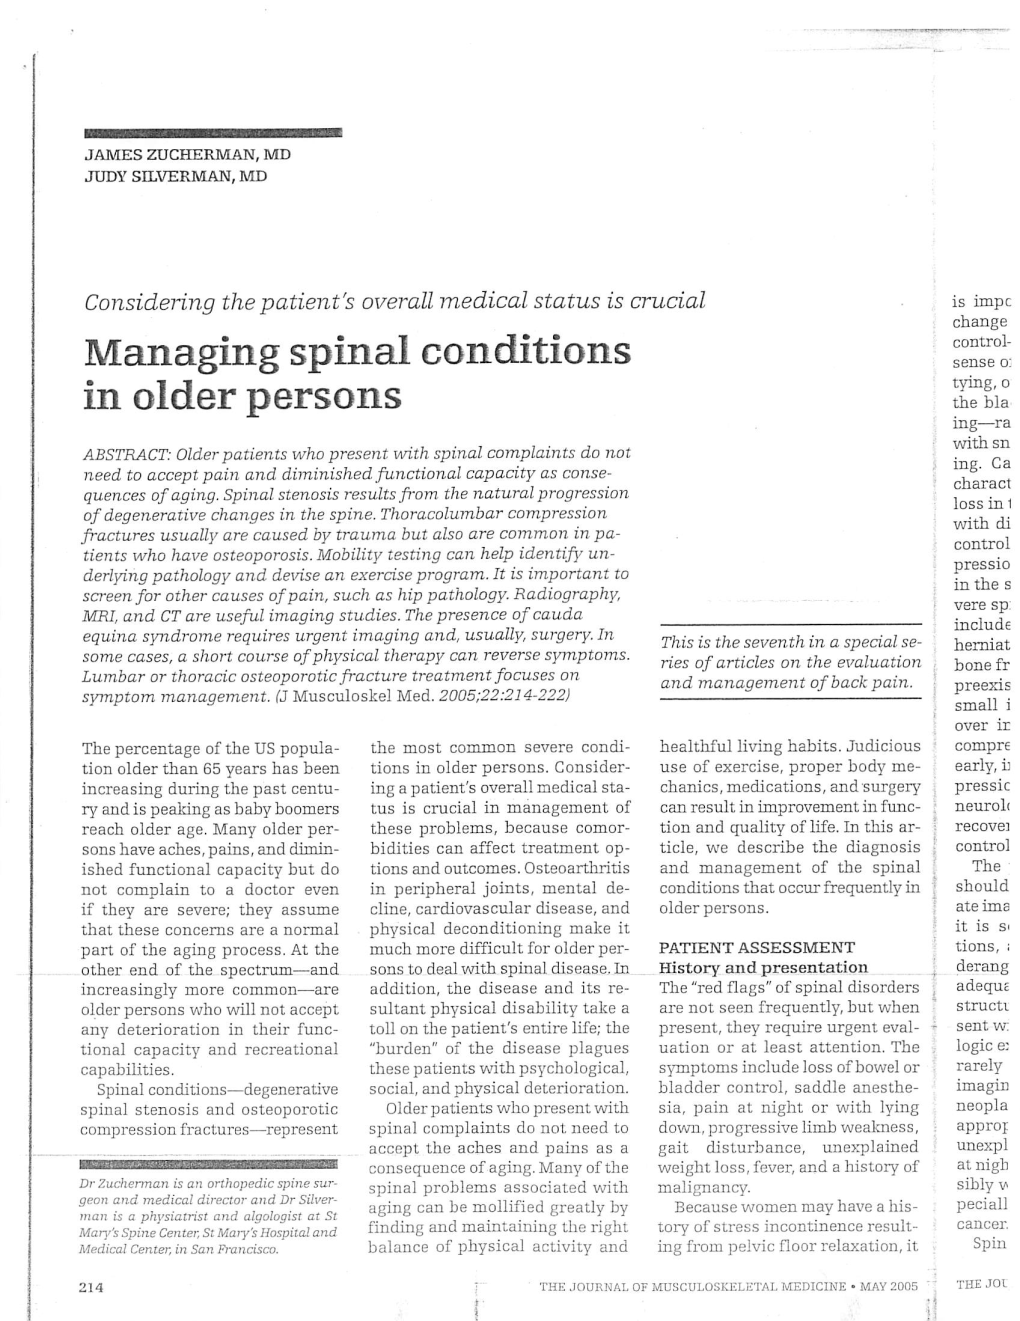 Managing Spinal Conditions in Older Persons